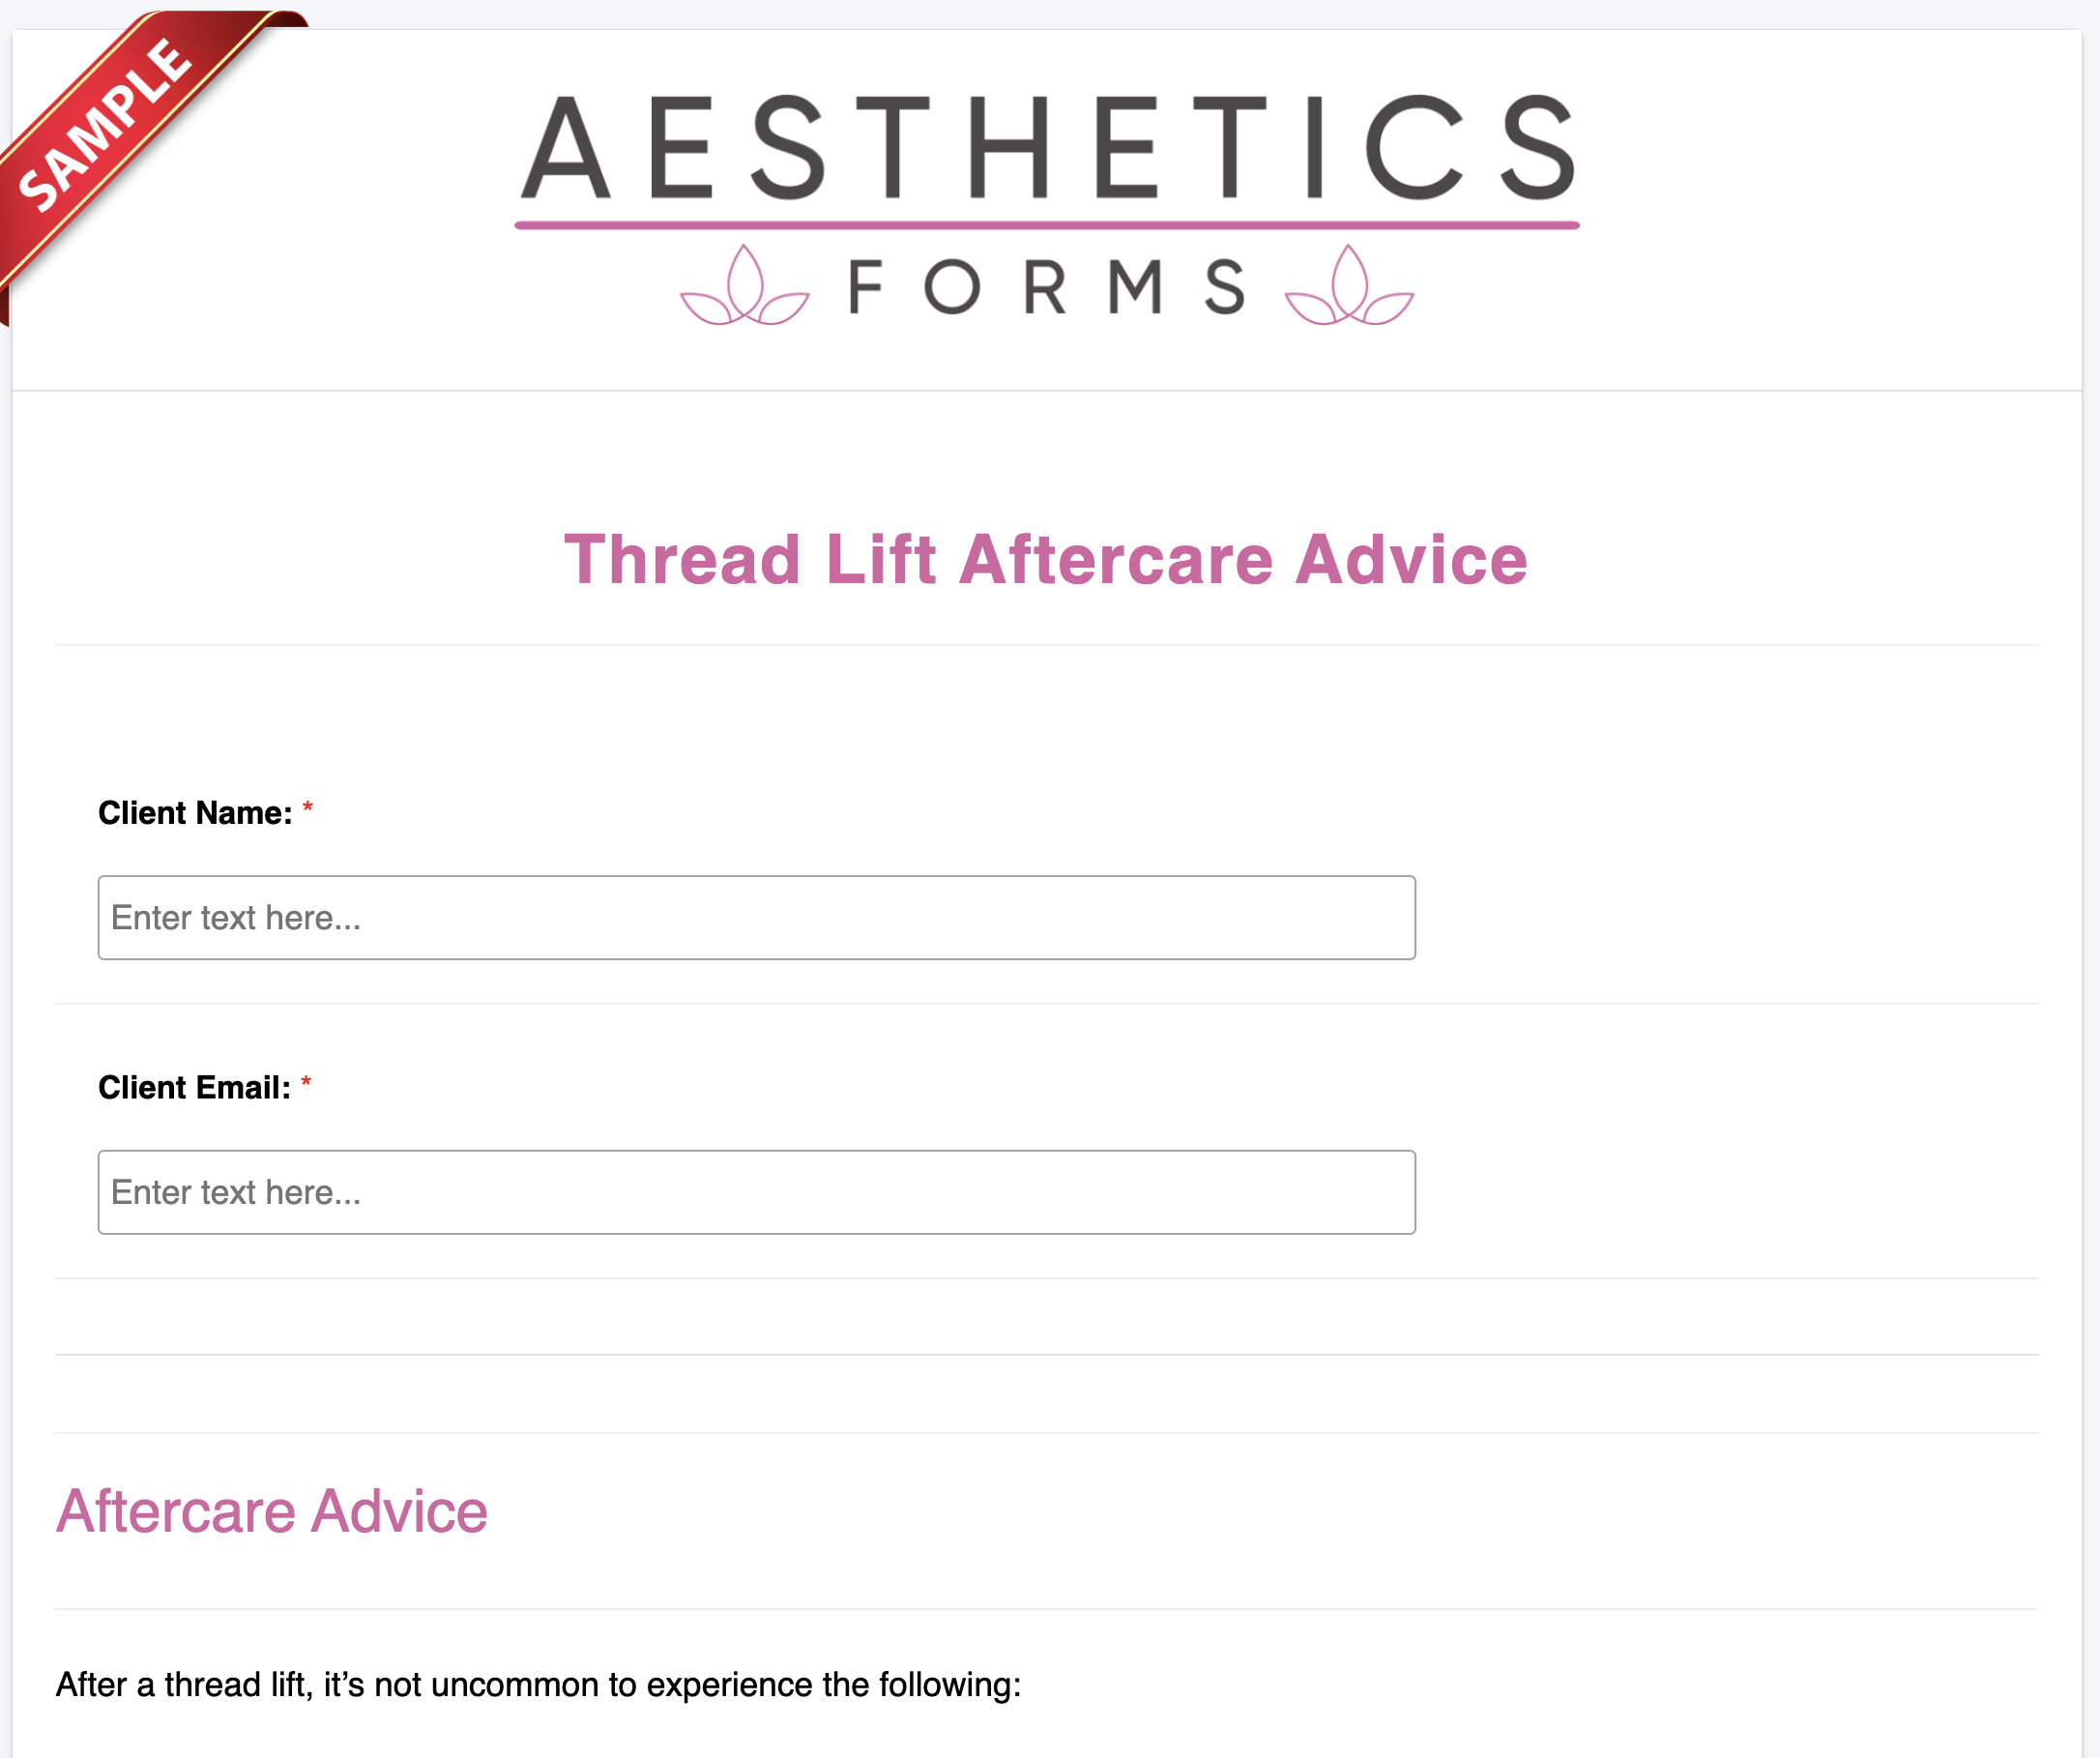 Thread Lift Aftercare Form